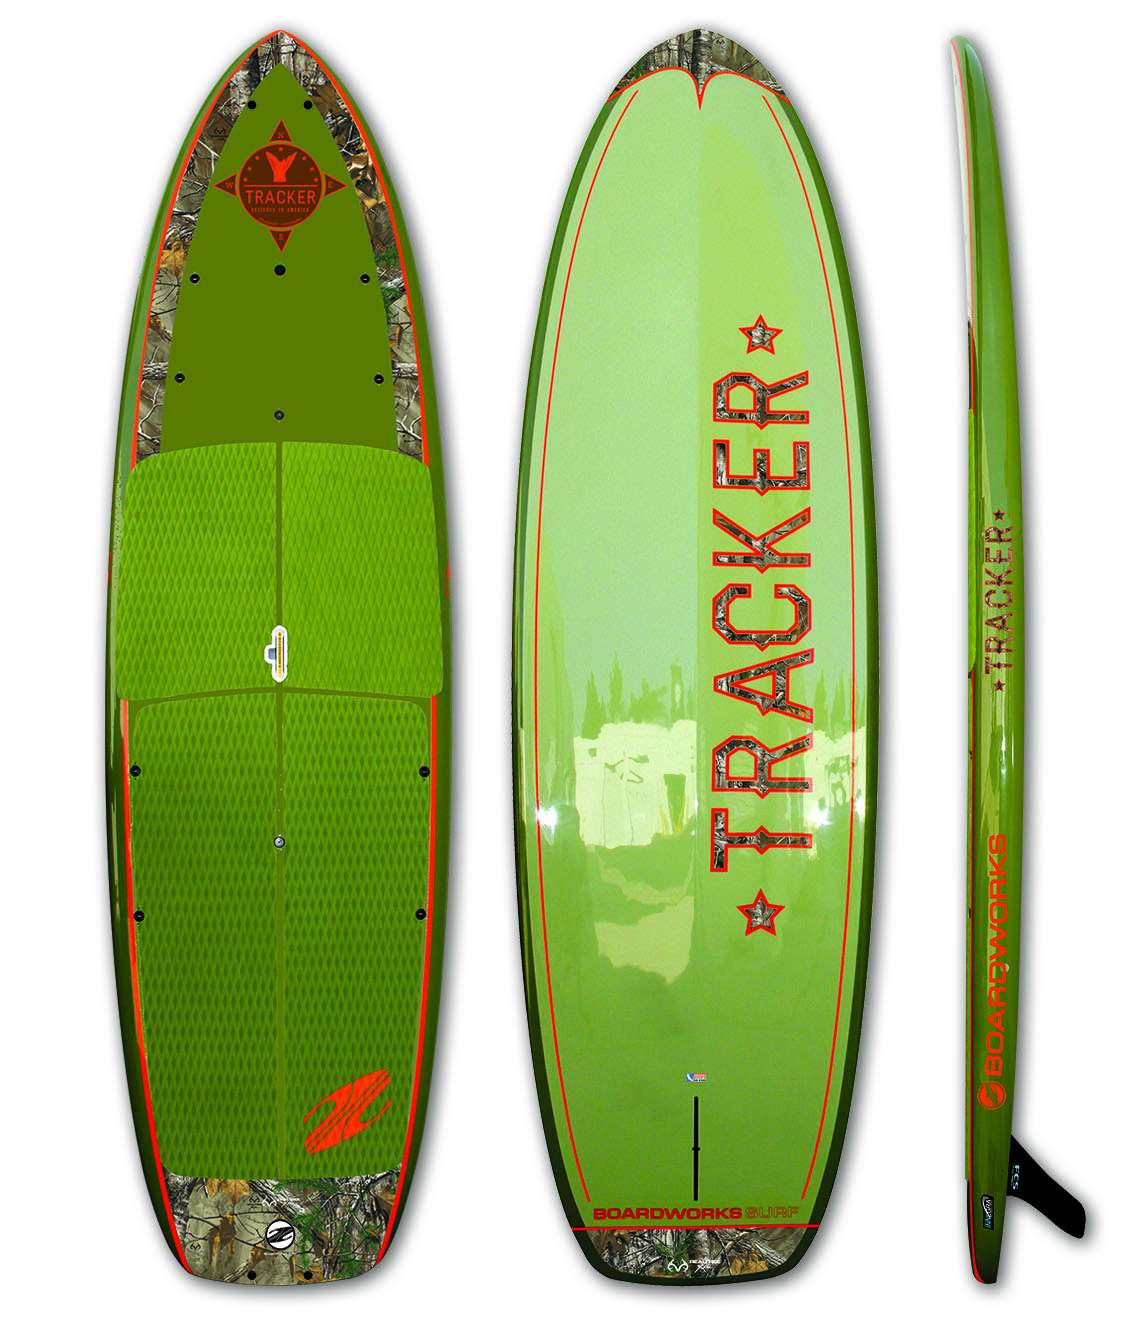 <b>Boardworks</b><br>	Tracker<br>	At 11 inches long x 35 inches wide, the new Boardworks Tracker is the perfect SUP fishing platform, plenty stable for paddlers of all sizes and abilities. It makes it easy to move around, cast off the deck and land fish. The Tracker features deep double concave running throughout the bottom for secondary stability, tracking and speed. The Tracker is built with Boardworks' new Innegra-Glass construction, making it ultra-durable. It comes with a handle for easy transport and multiple deck tie-down plugs for bringing extra gear or adding a variety of attachments.